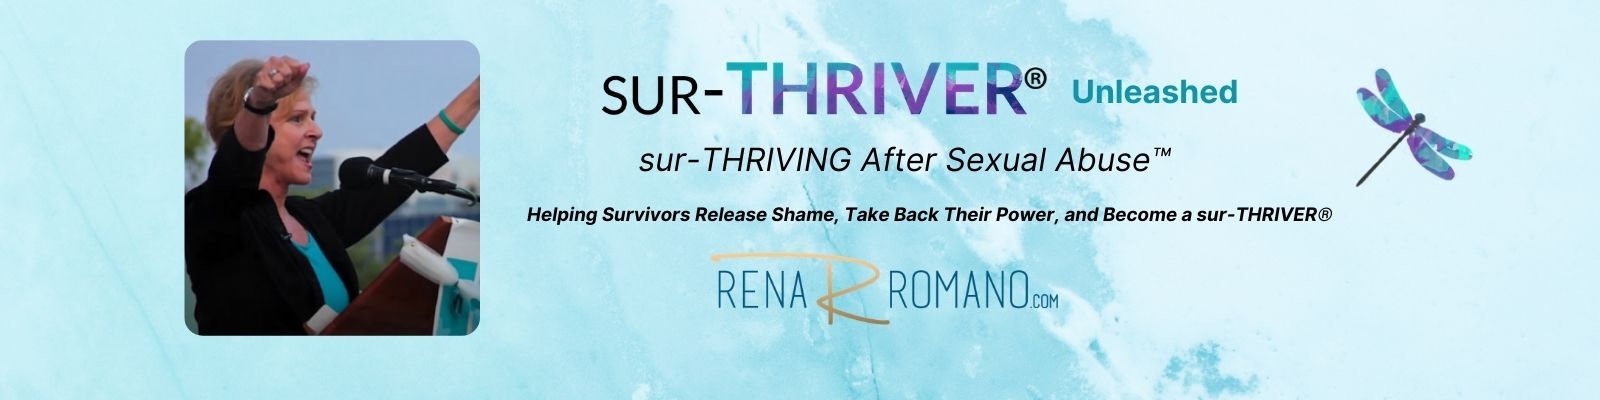 sur-THRIVER® Unleashed - sur-THRIVING after sexual Abuse™